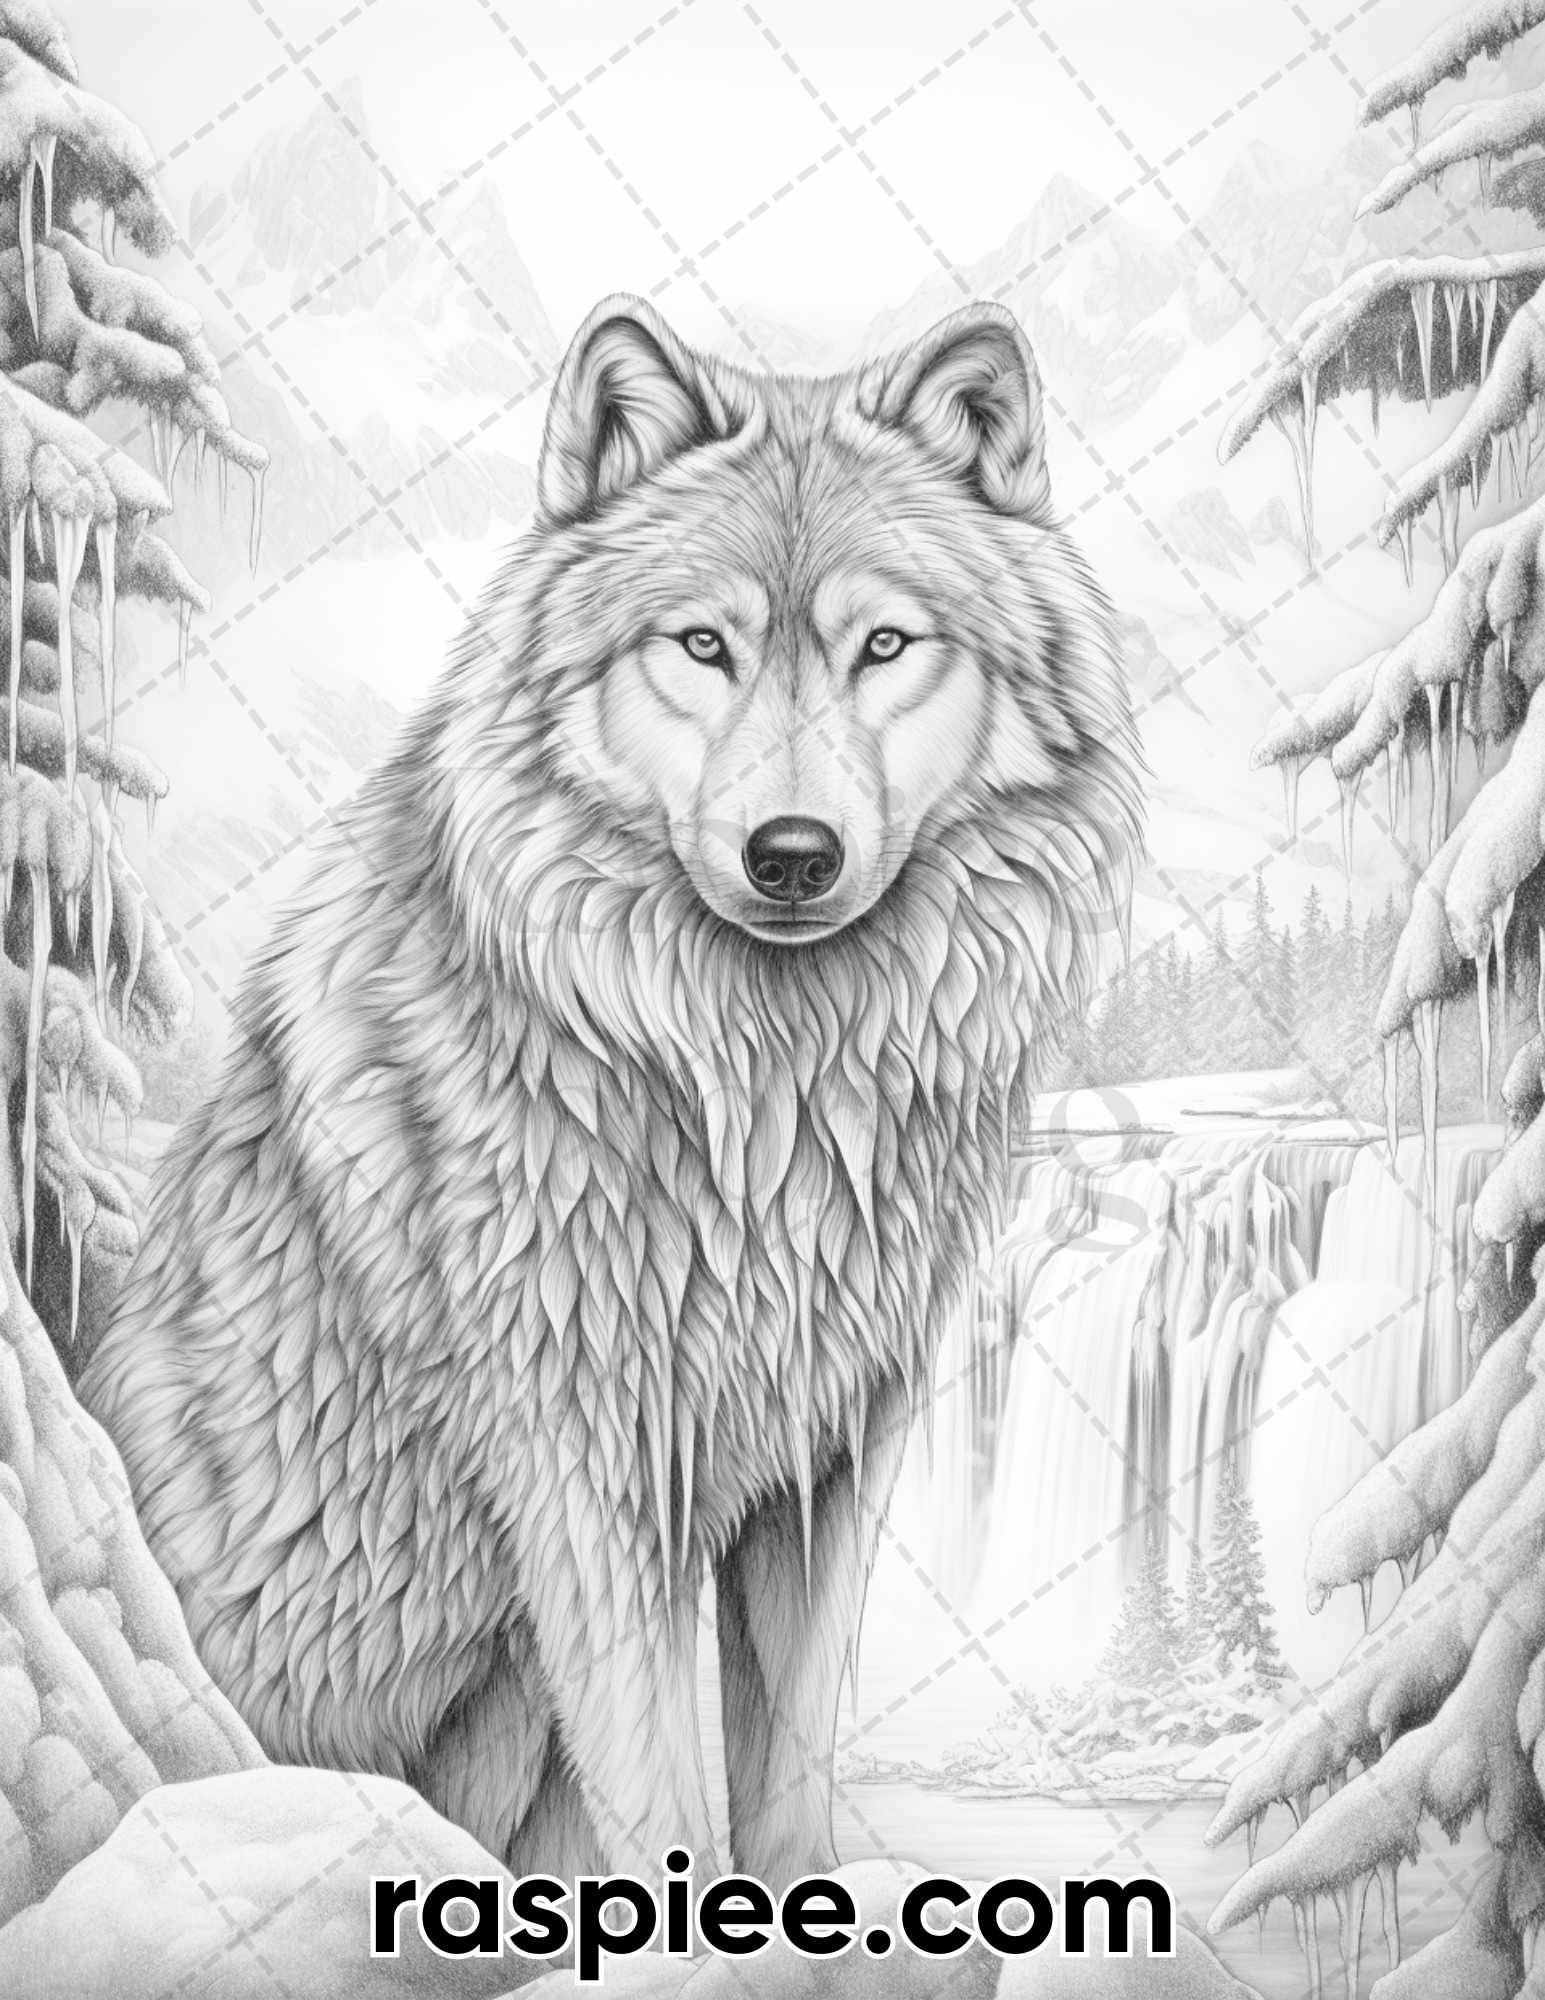 Winter Wolf Grayscale Coloring Page, Printable Adult Coloring Sheet, Arctic Animal Coloring Pages, Wolf Coloring Book Printable, Snowy Wildlife Coloring Page, Stress Relief Activity, Winter Forest Animals Coloring Pages, DIY Coloring Project, Relaxing Coloring Activity, Animal Coloring Sheets, Winter Coloring Pages